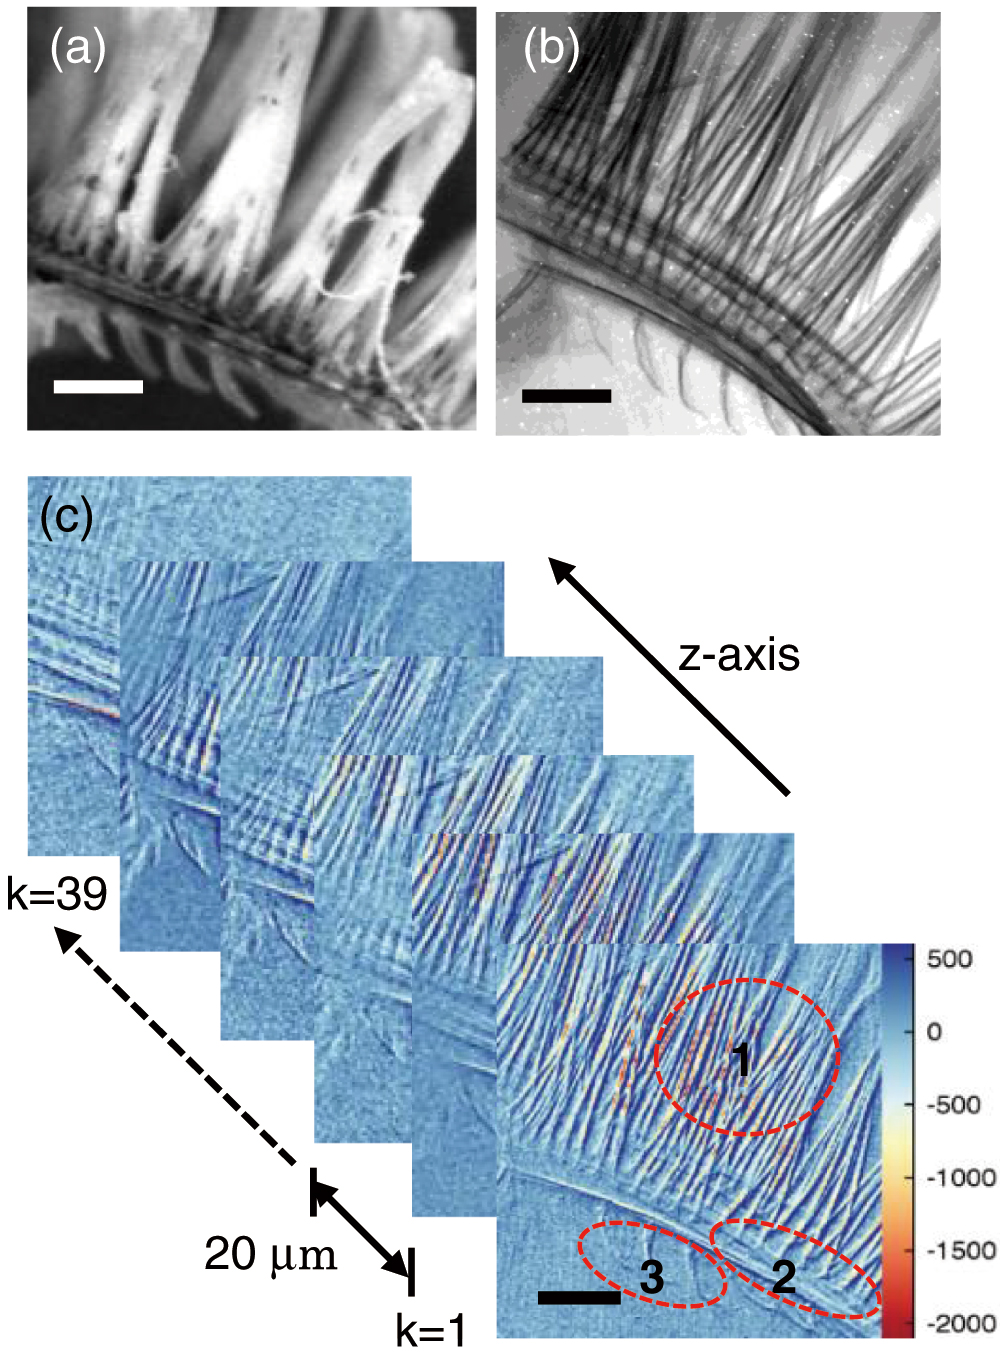 Images of the gills of a Poecilia reticulata fish. (a) The optical microscopic image. (b) The X-ray absorption image of the gills. (c) Example of the X-ray quantitative phase images in the xy plane. 1, filaments; 2, arches; 3, anchors. The inset scale bar is 200 µm.